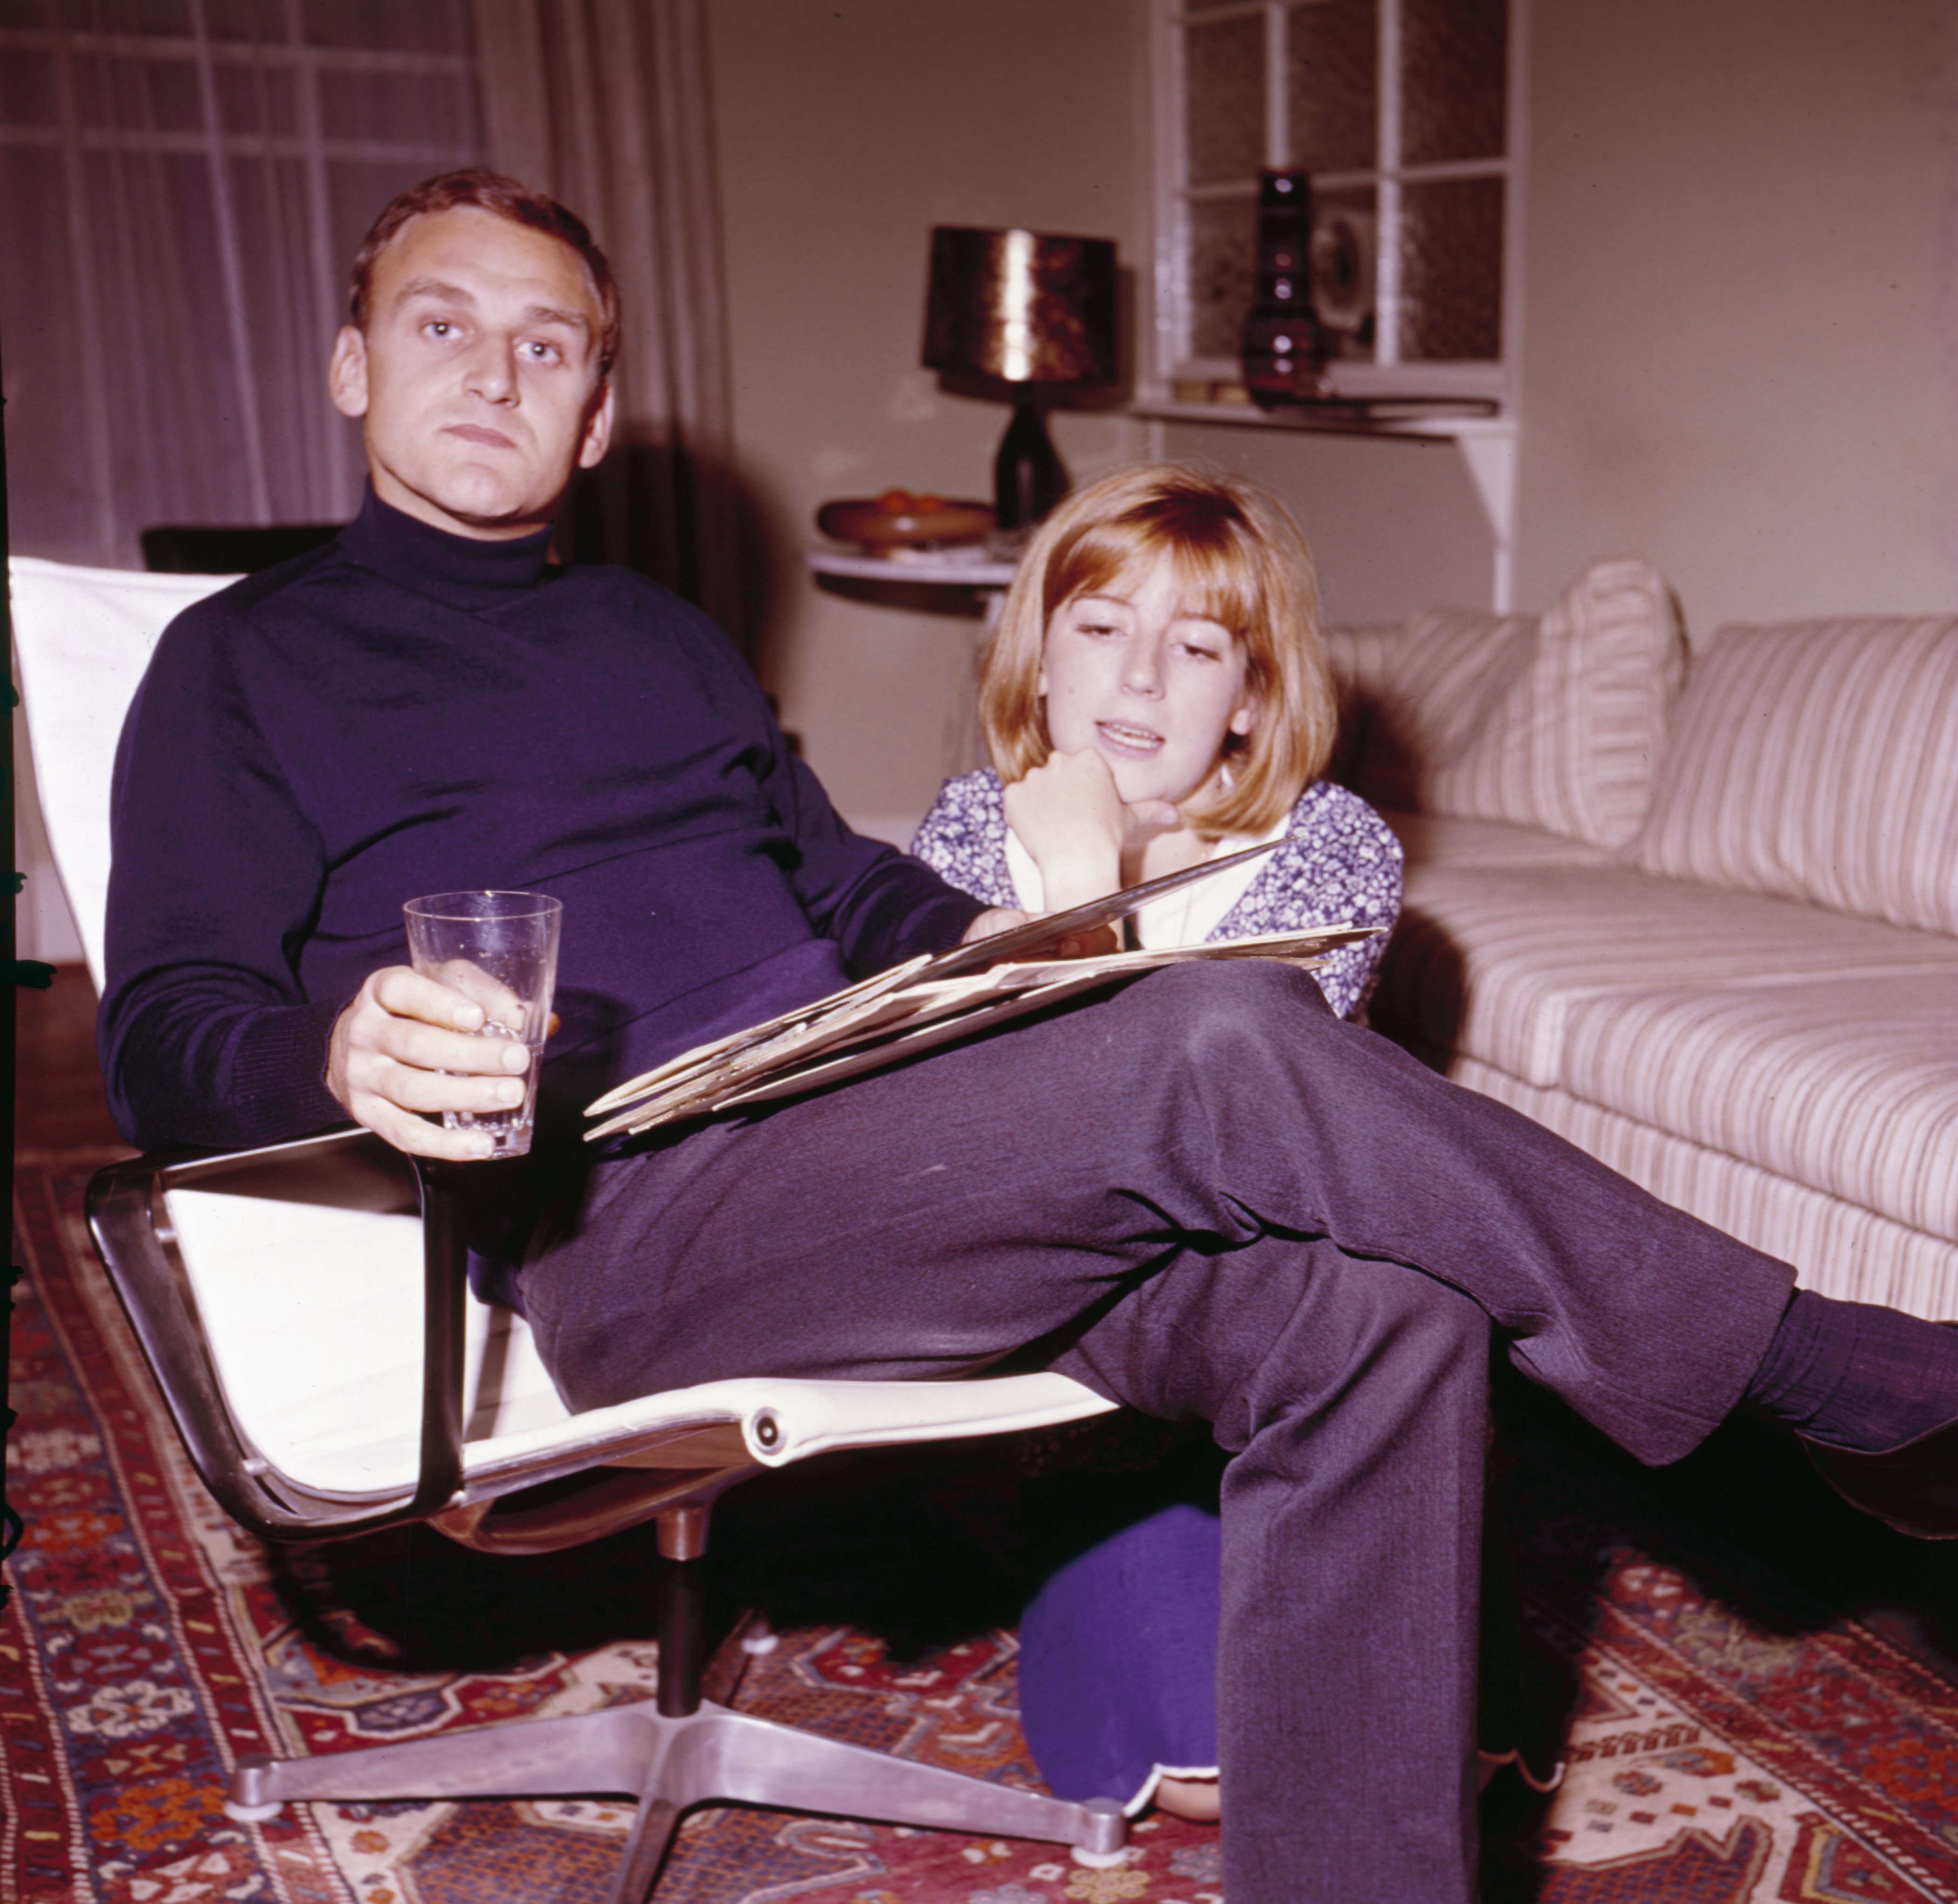 John Thaw (1942-2002) posed sitting in a lounge chair beside a young woman in 1964 | Photo: Getty Images